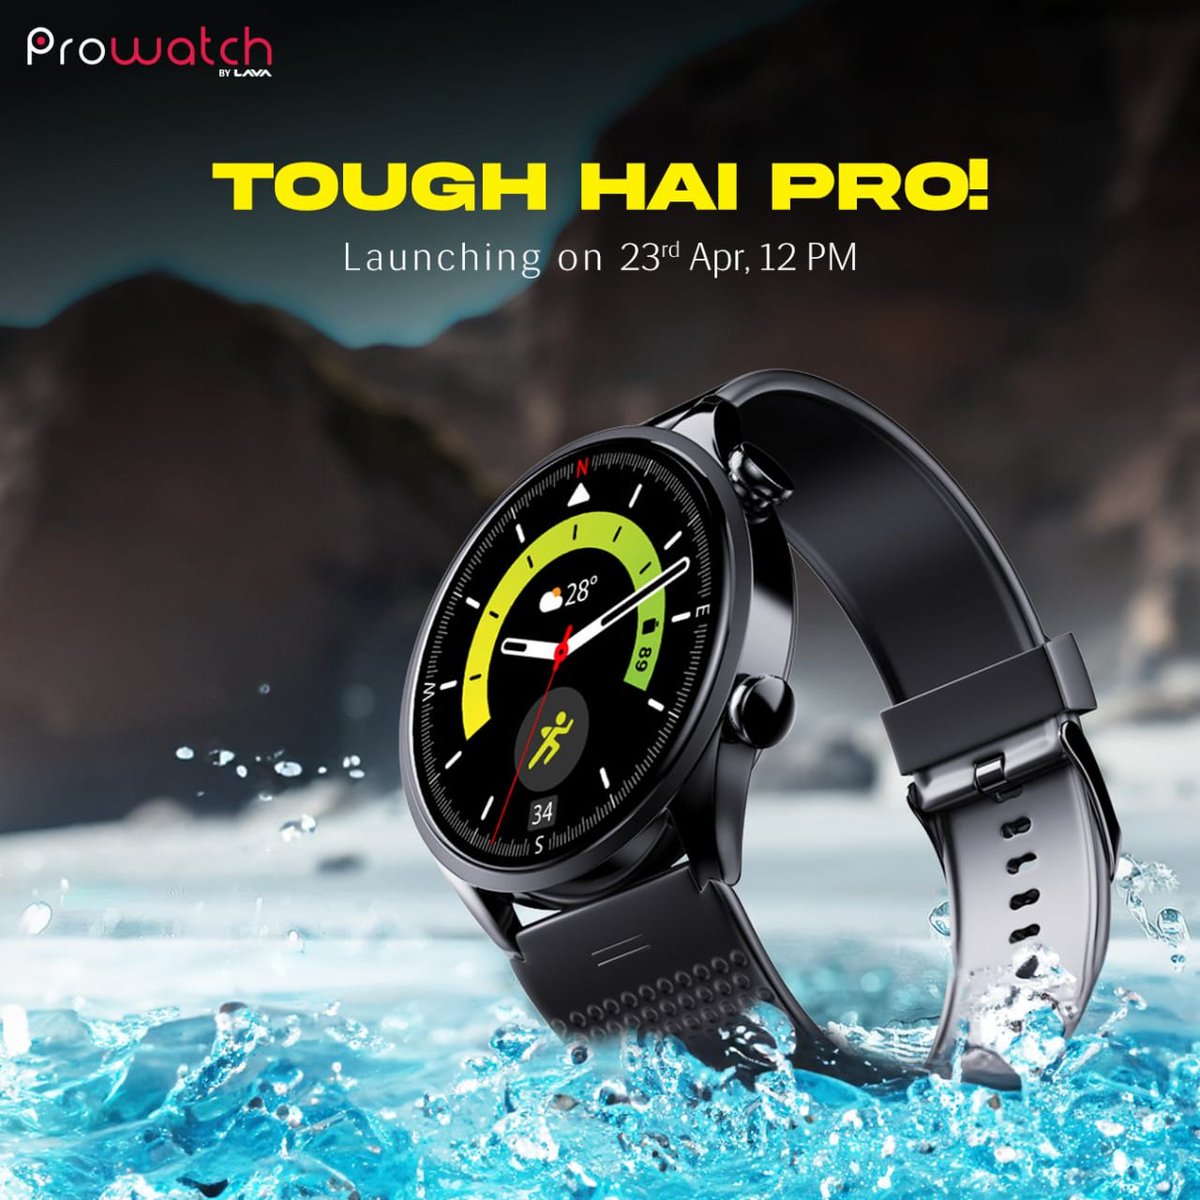 The future of watches is here! 🌟 #ProwatchLaunchTomorrow is arriving on April 23rd, showcasing breakthrough technology like Gorilla Glass 3 protection and advanced sensors. Brace yourself for the ultimate wearable experience!